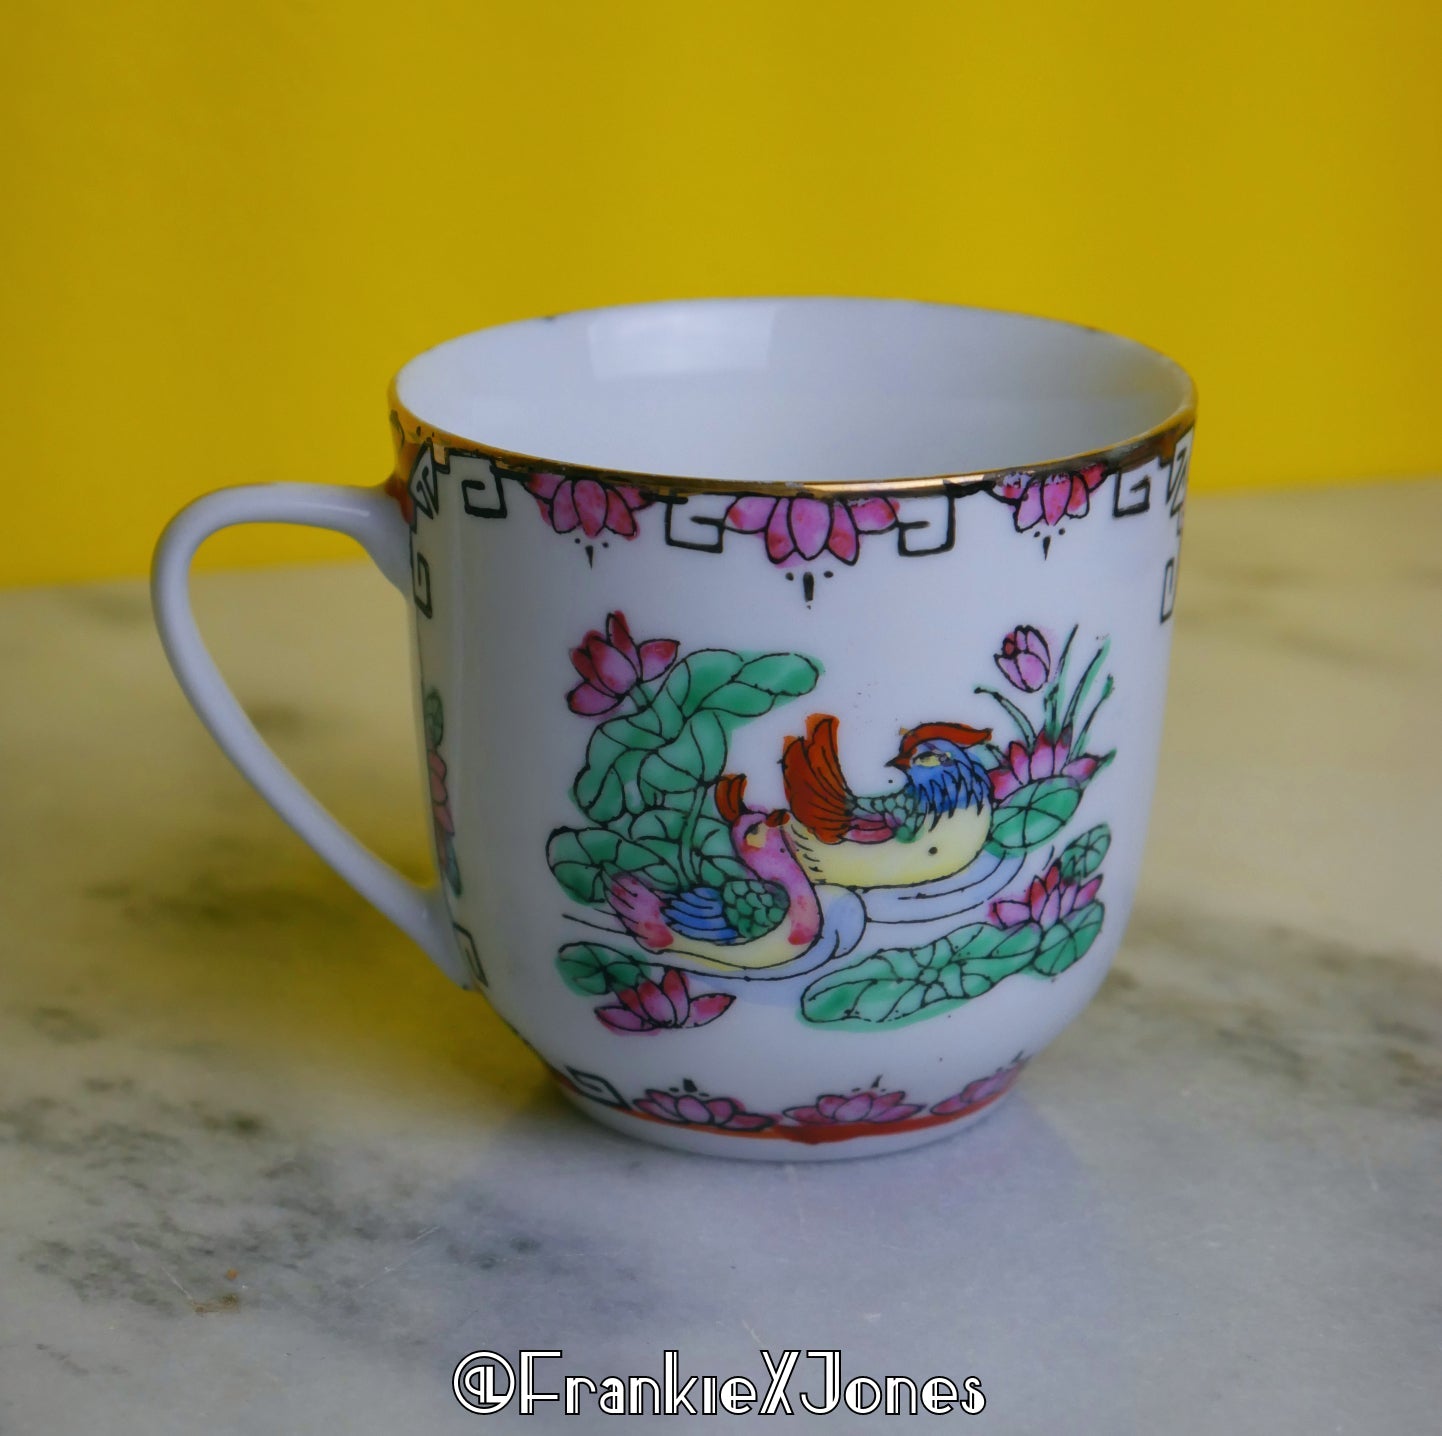 Chinoiserie Tea Cup Set ✤ Cup + Saucer ✤ Birds + Water Lilies